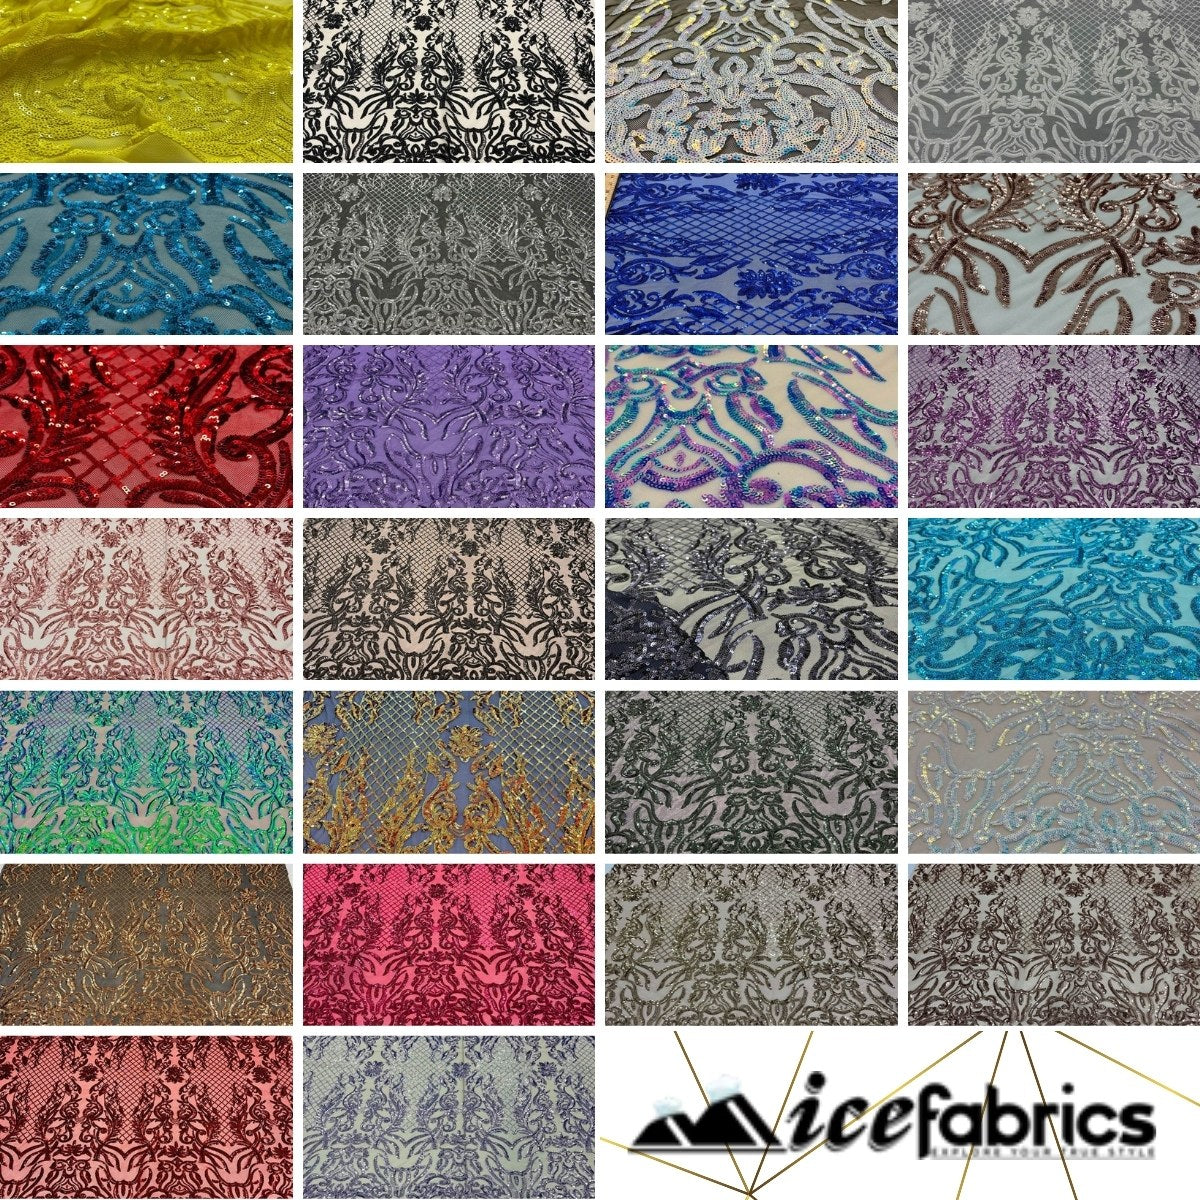 FUSHICHENG IMPEXP Fabric by The Yard 1 Yard Sequin Stretch Fabric